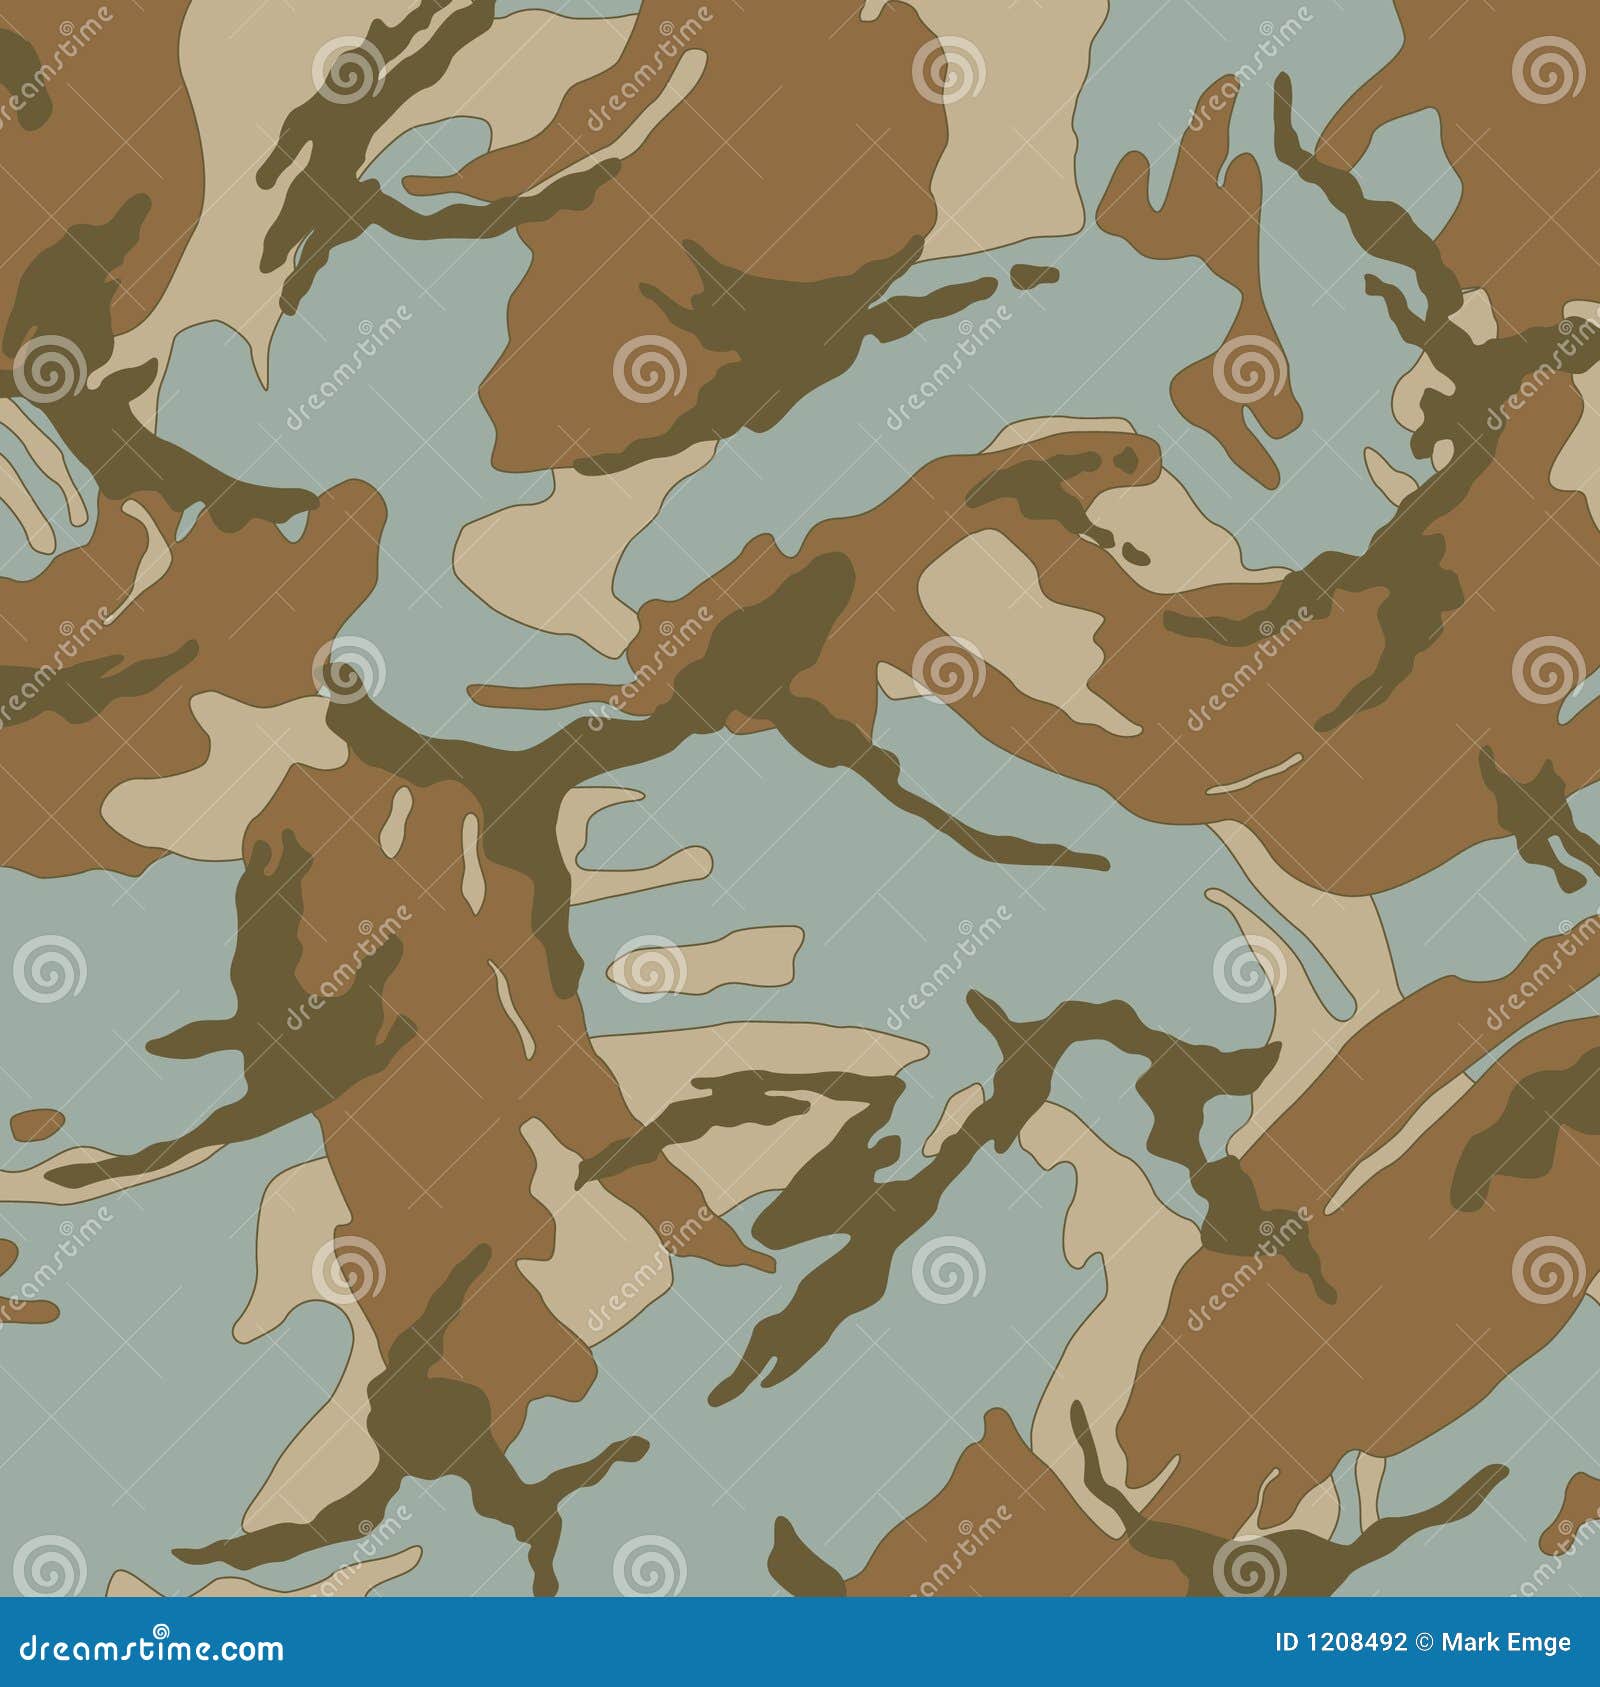 Camouflage Vector Pattern 2 Stock Photography - Image: 1208492